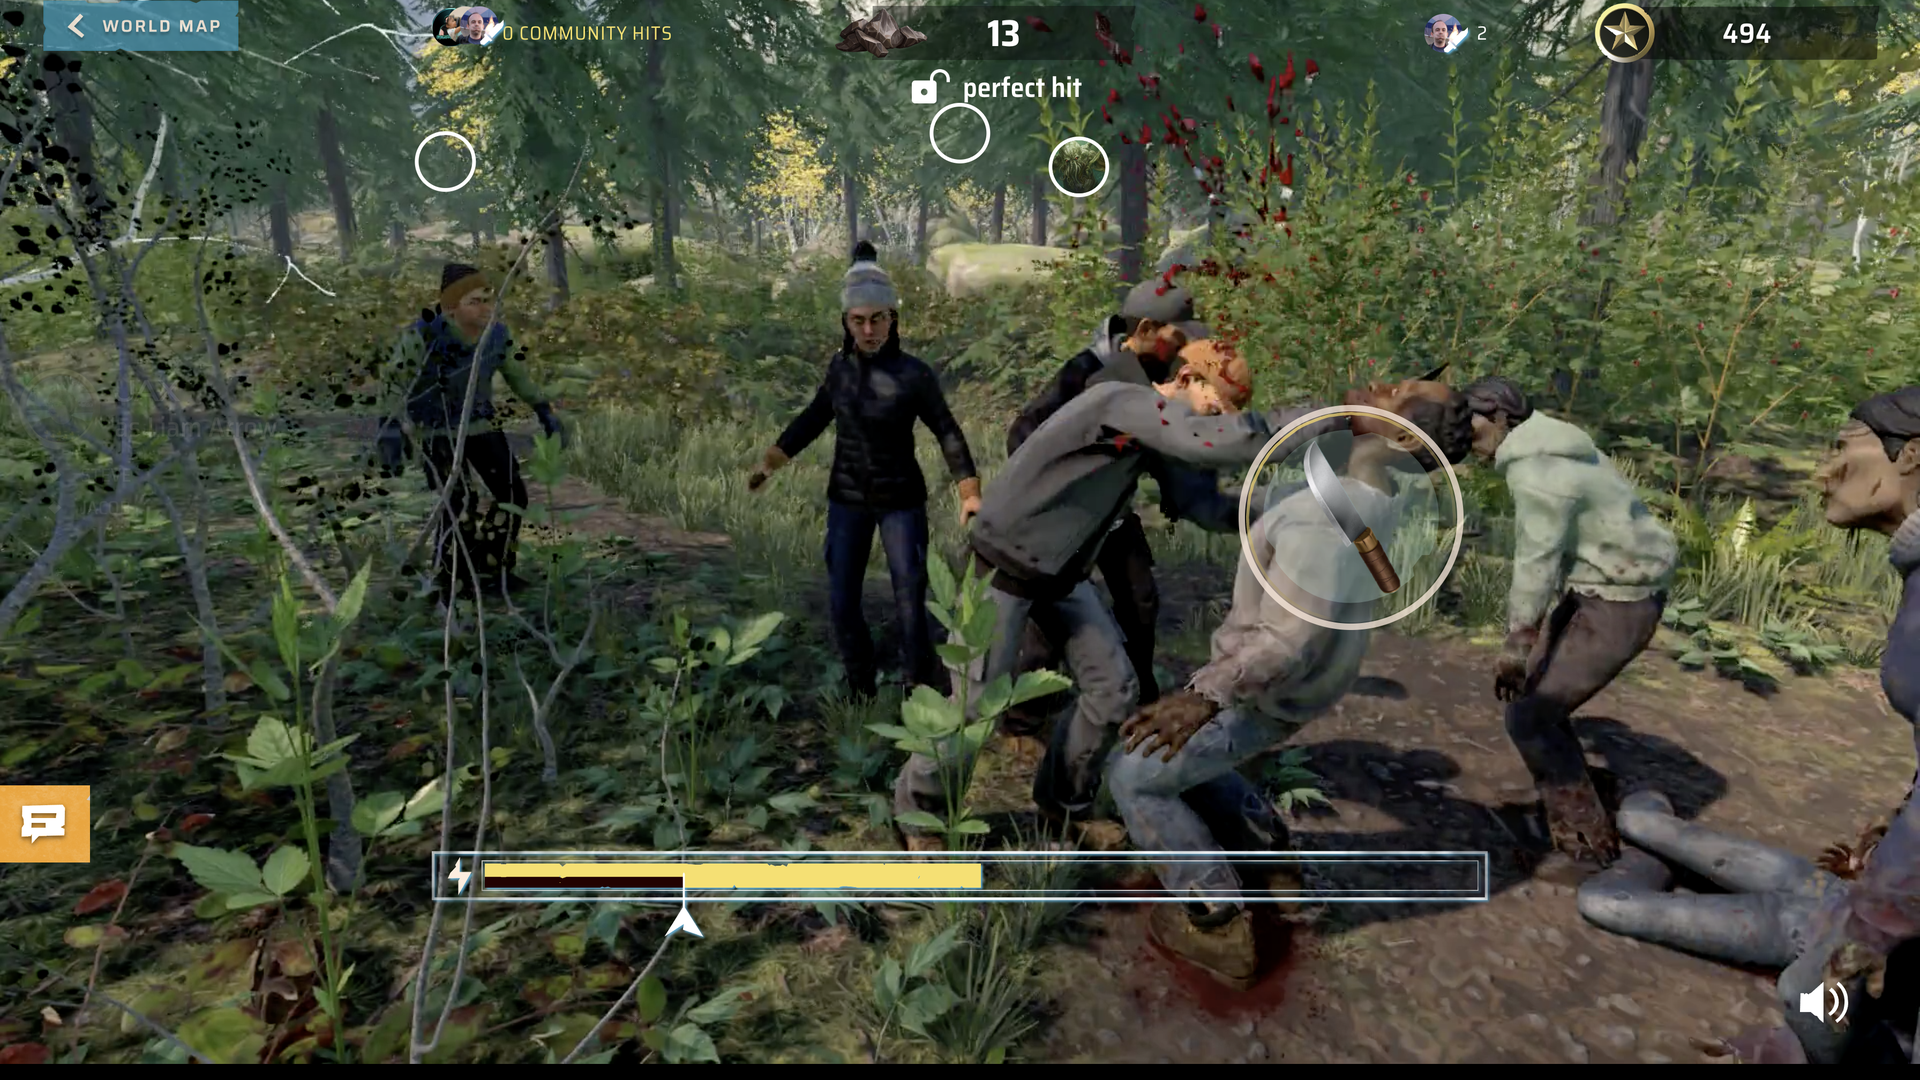 Video game screenshot showing human survivors fending off zombies with knives. Icons indicate multiple players are controlling the action